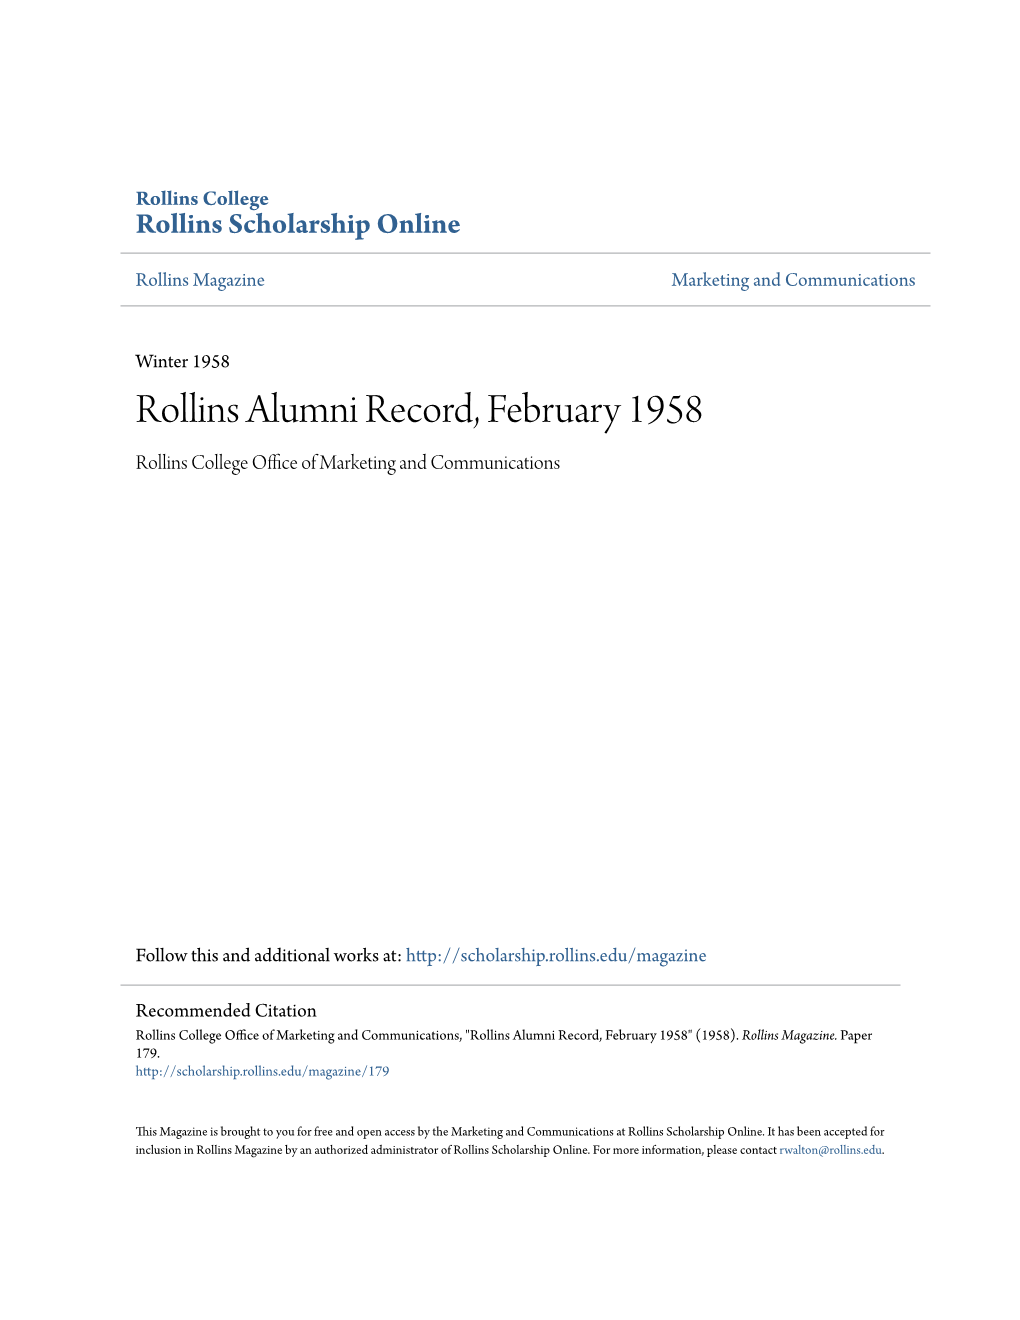 Rollins Alumni Record, February 1958 Rollins College Office Ofa M Rketing and Communications